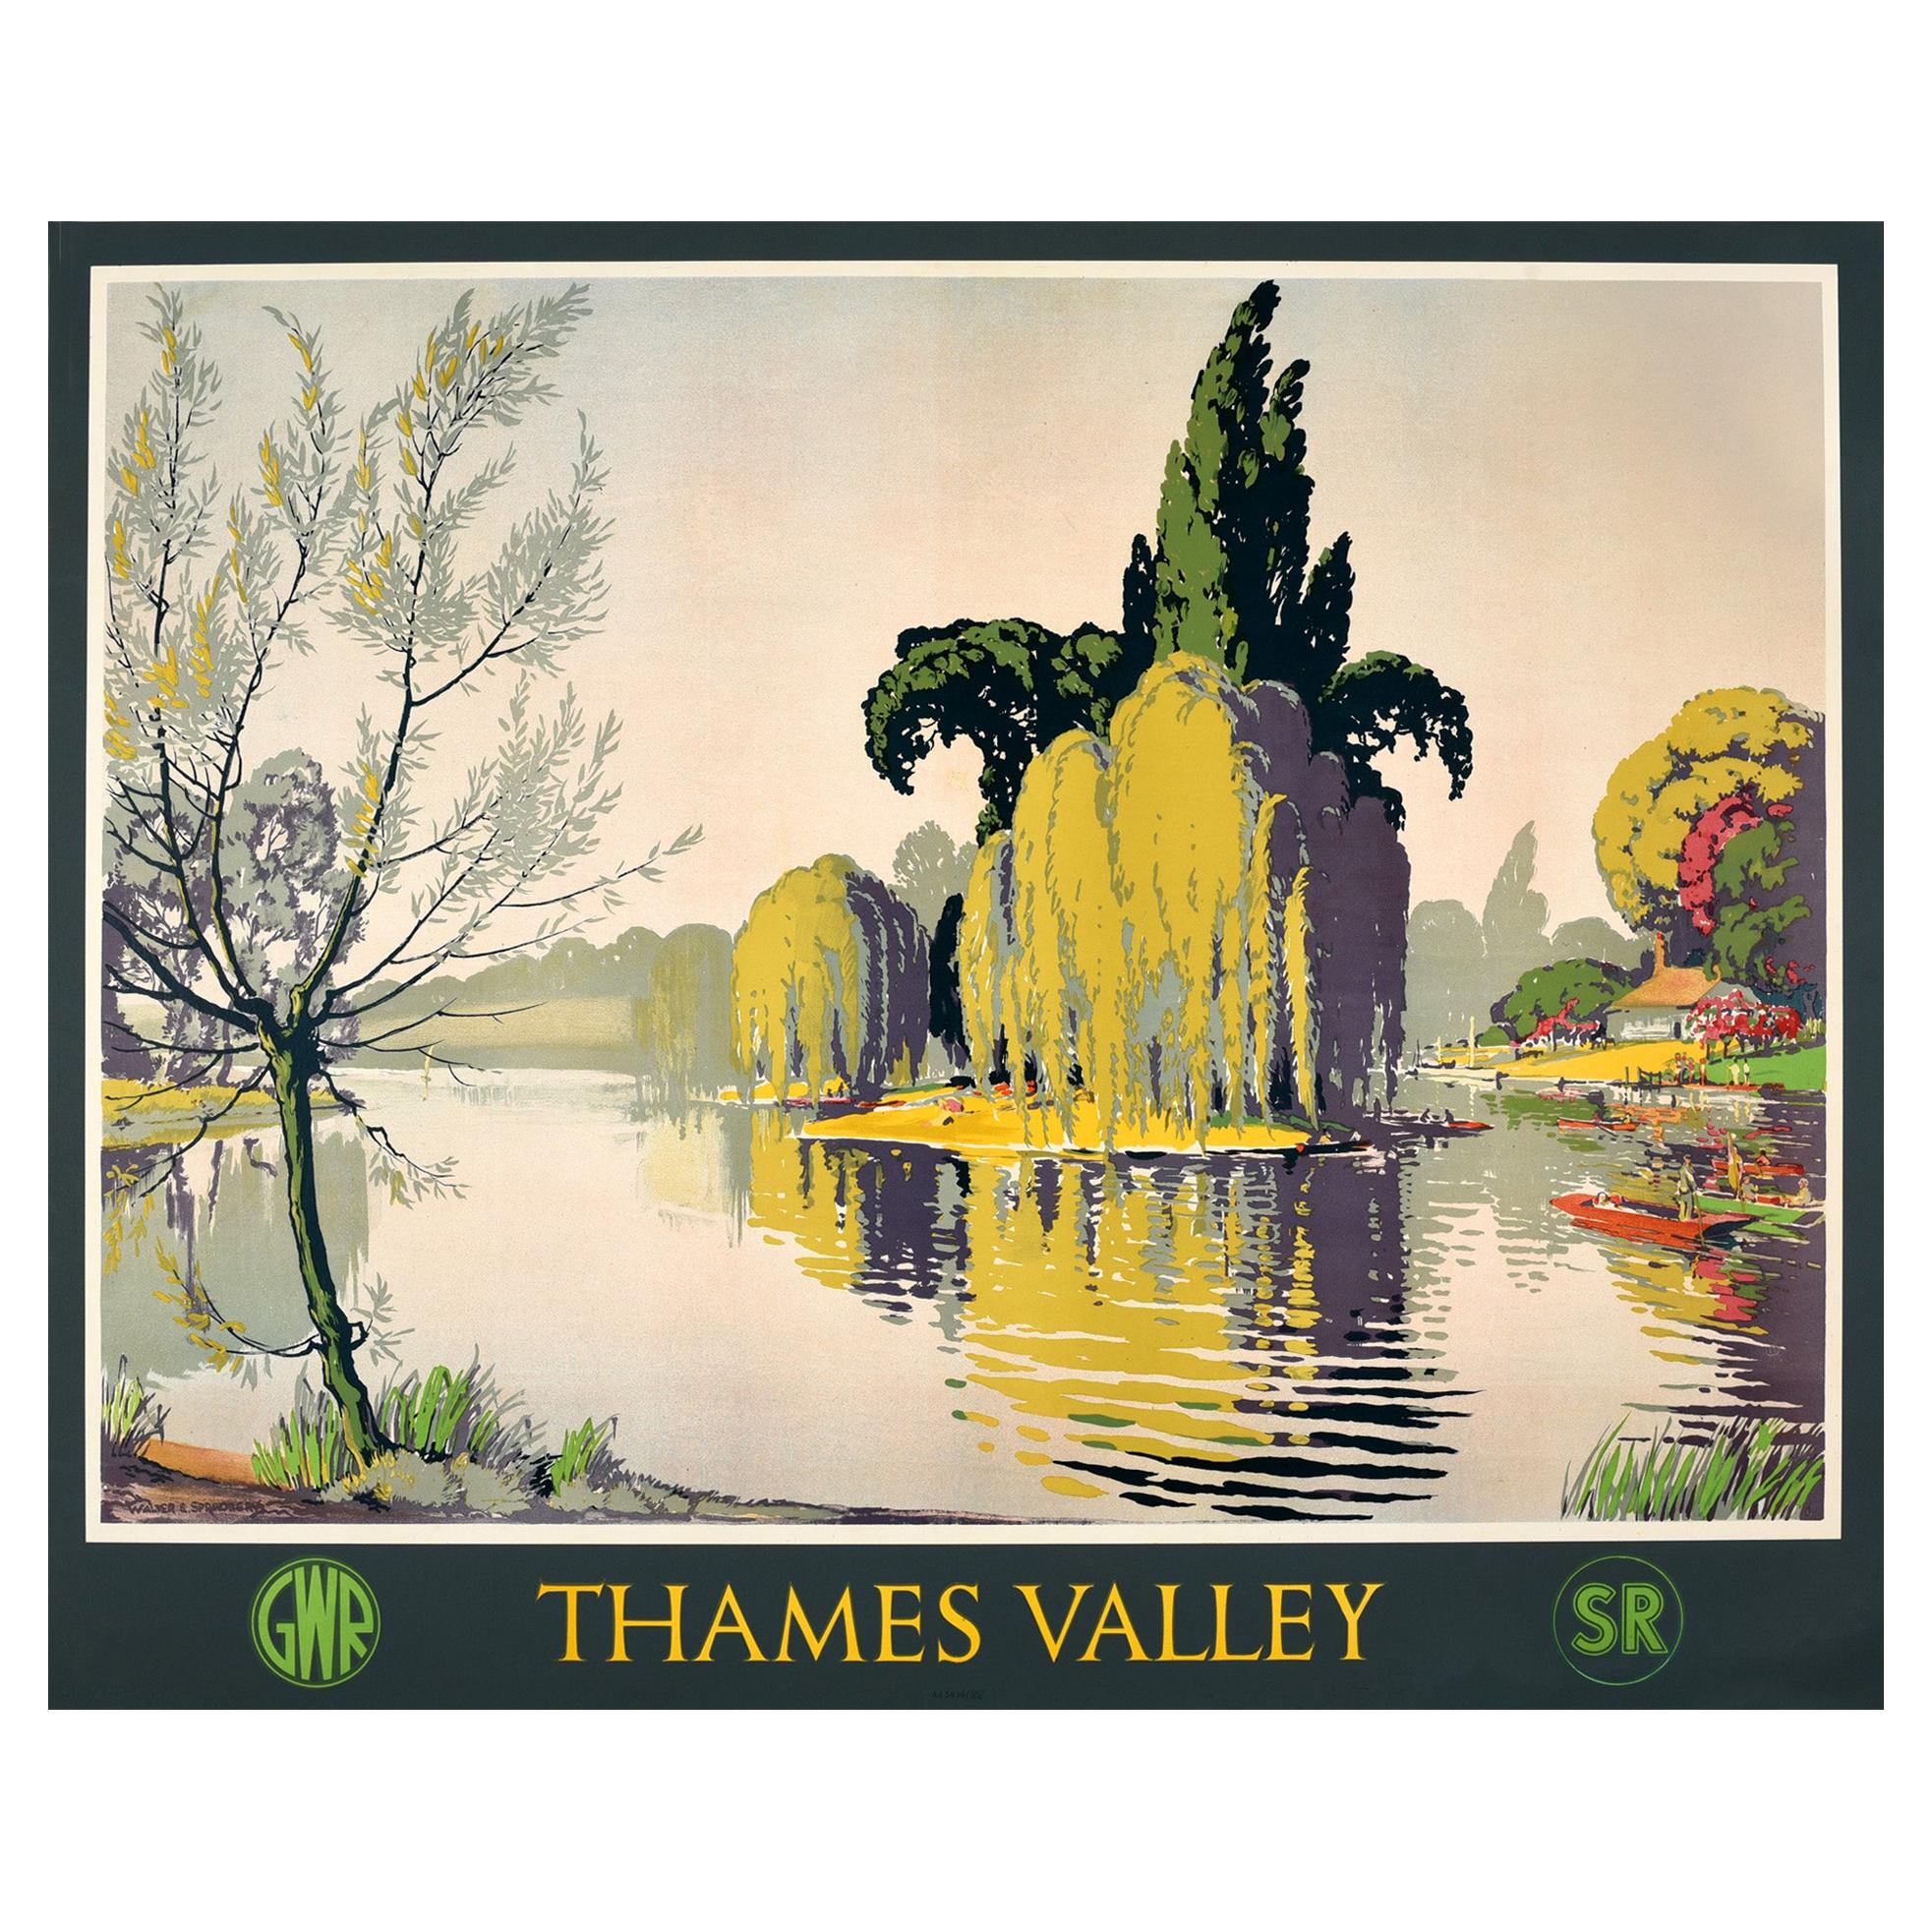 Original Vintage Great Western And Southern Railway Poster Thames Valley GWR SR